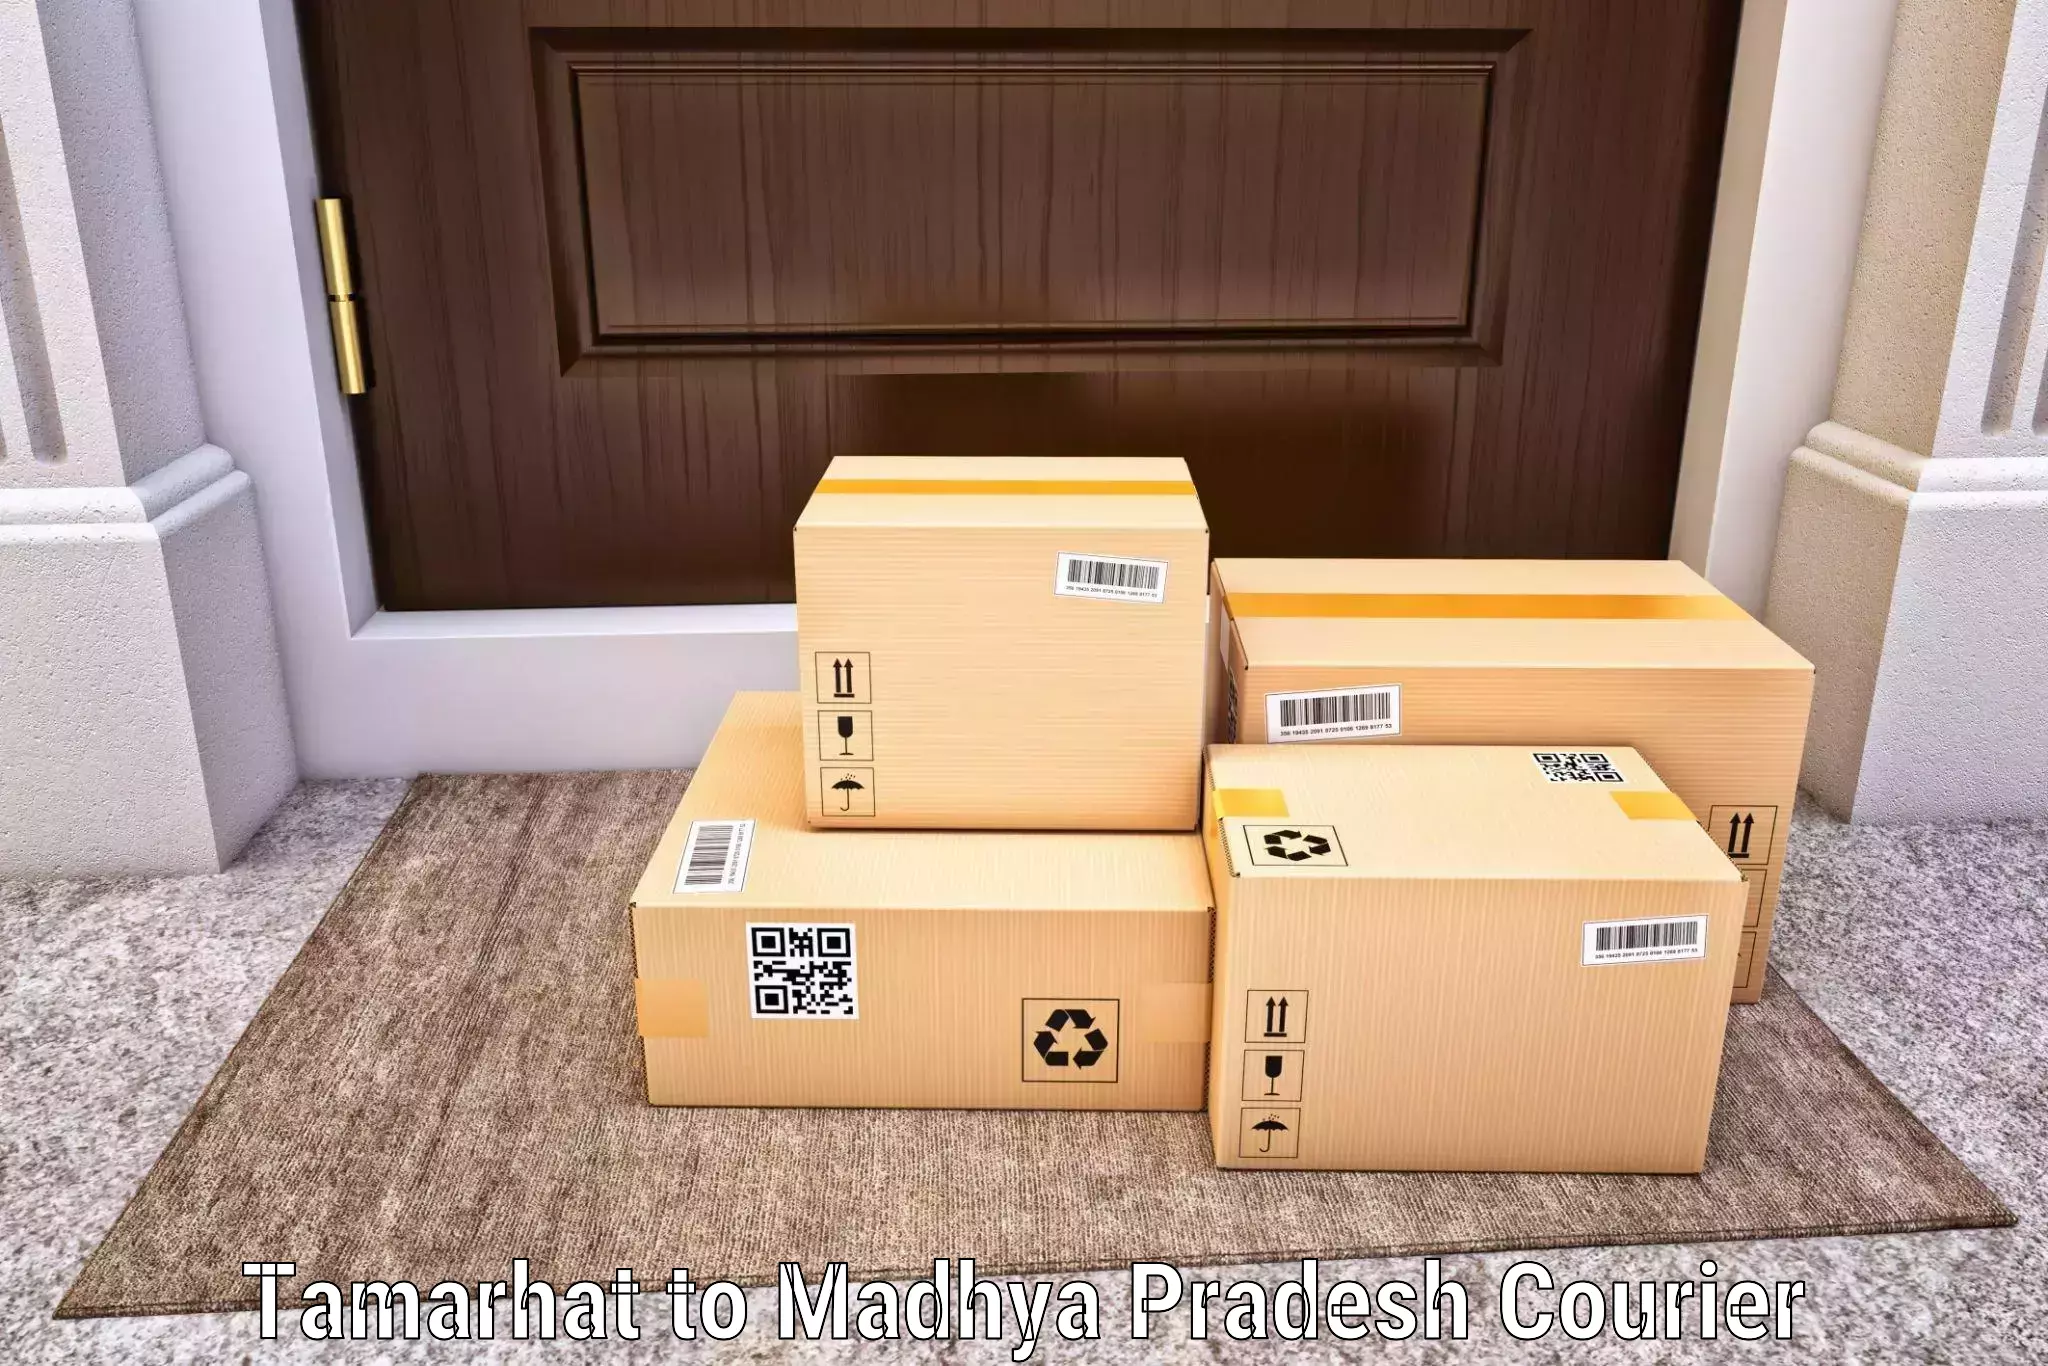 Automated parcel services Tamarhat to Sidhi